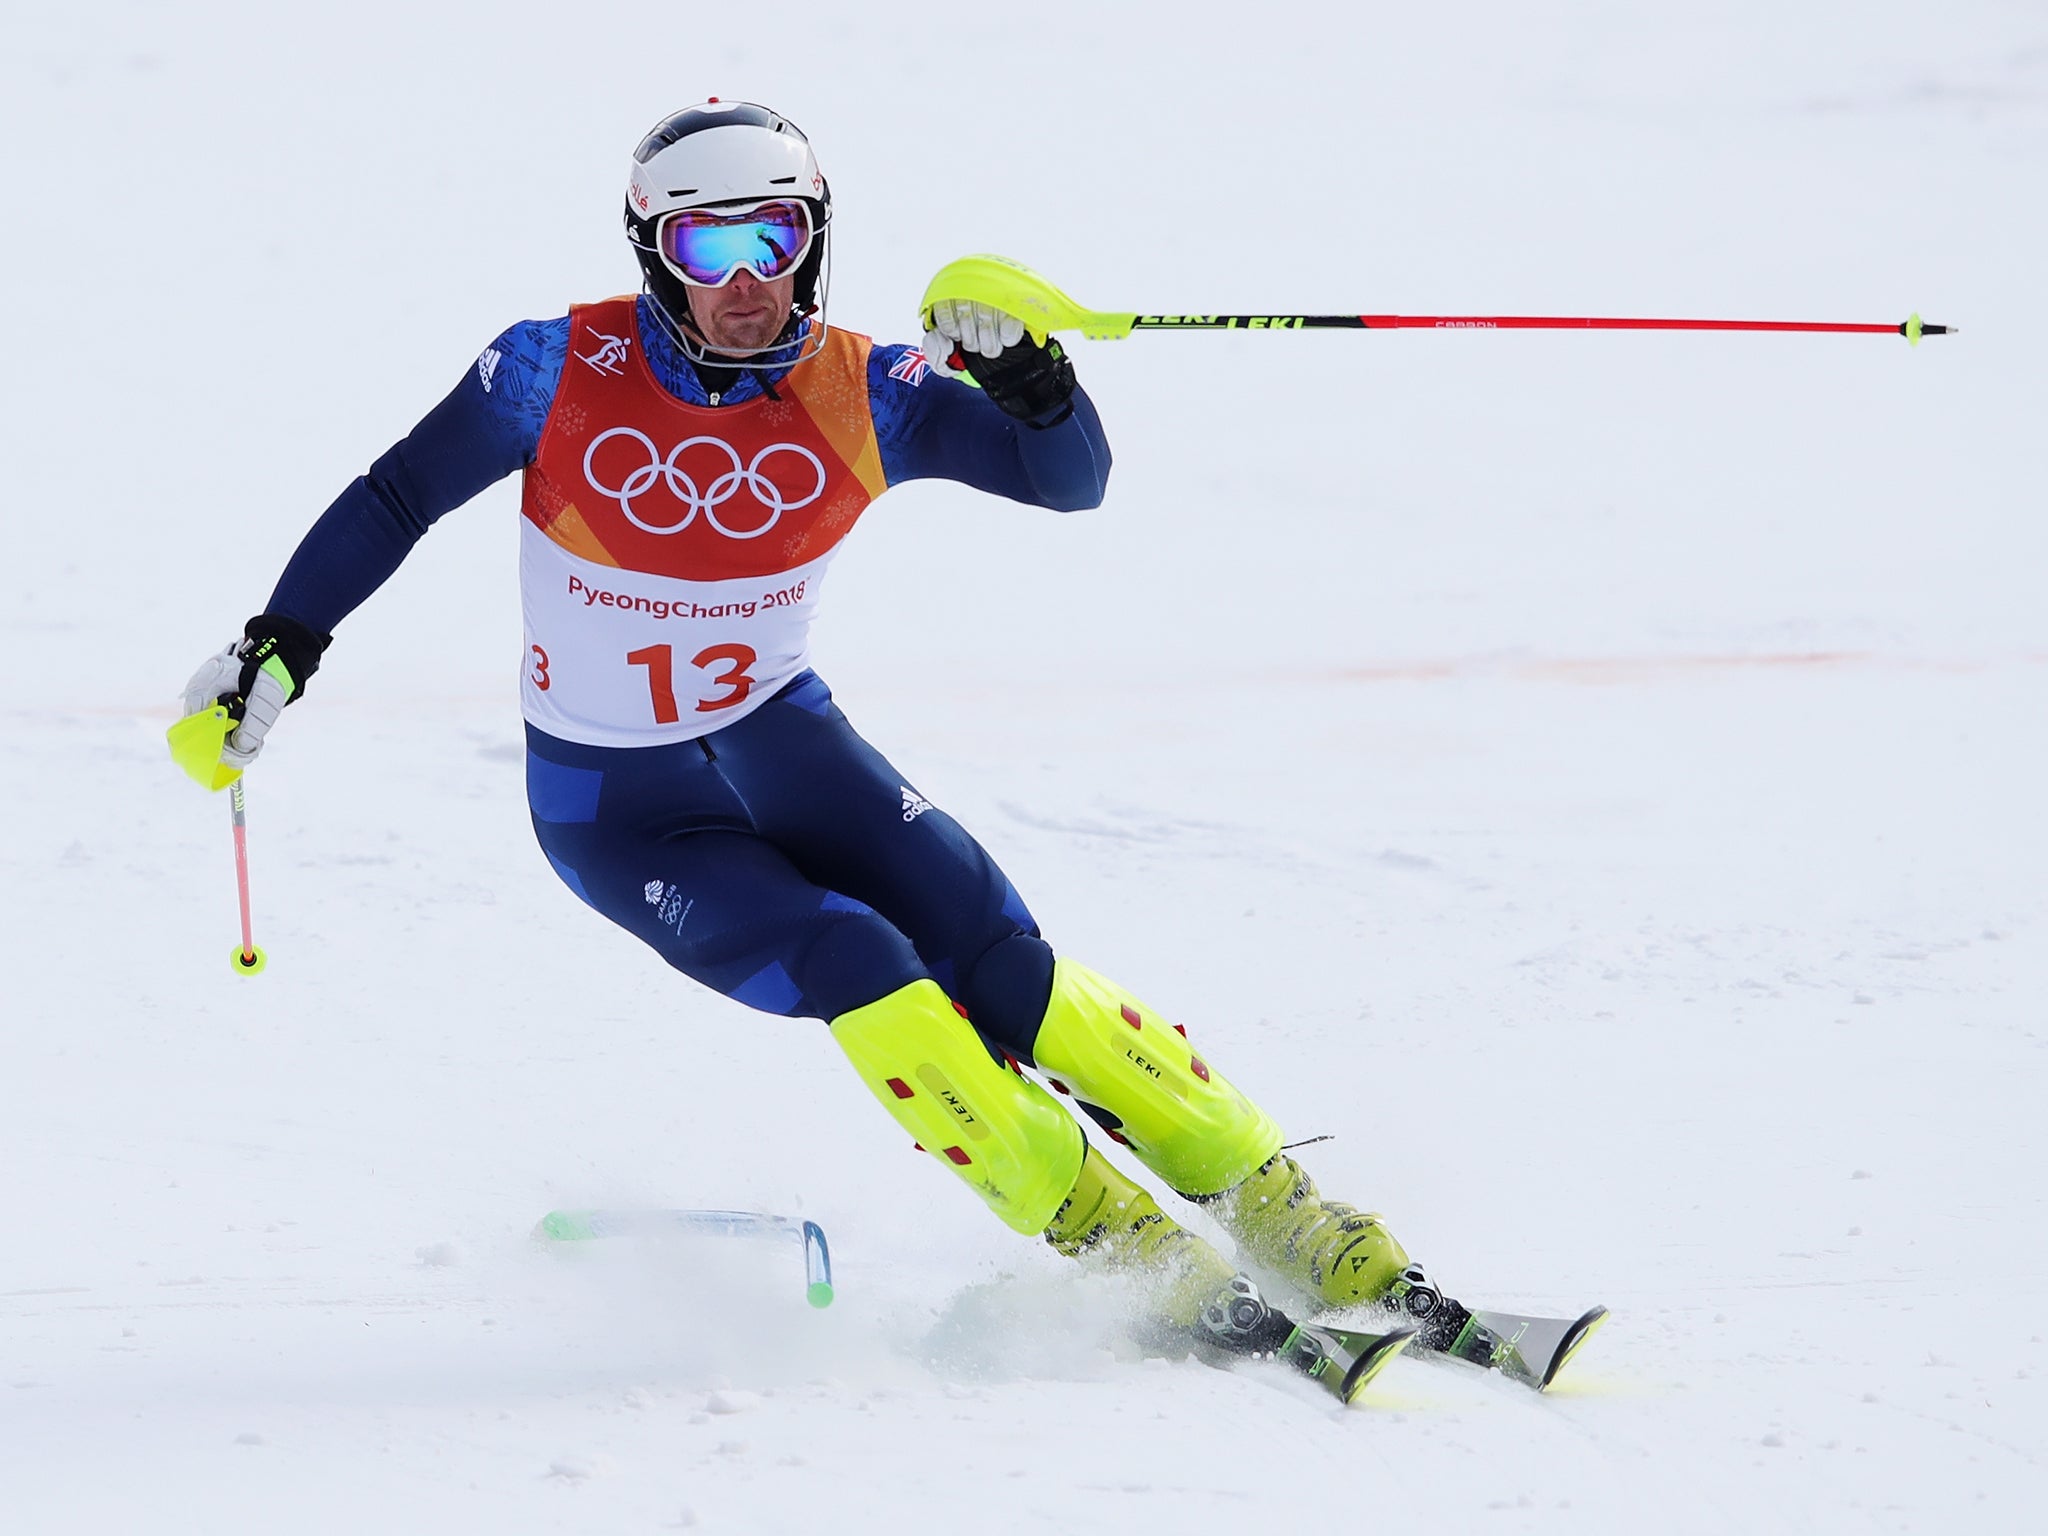 Ryding believes he has a shot at a medal at the 2022 Beijing Winter Olympics